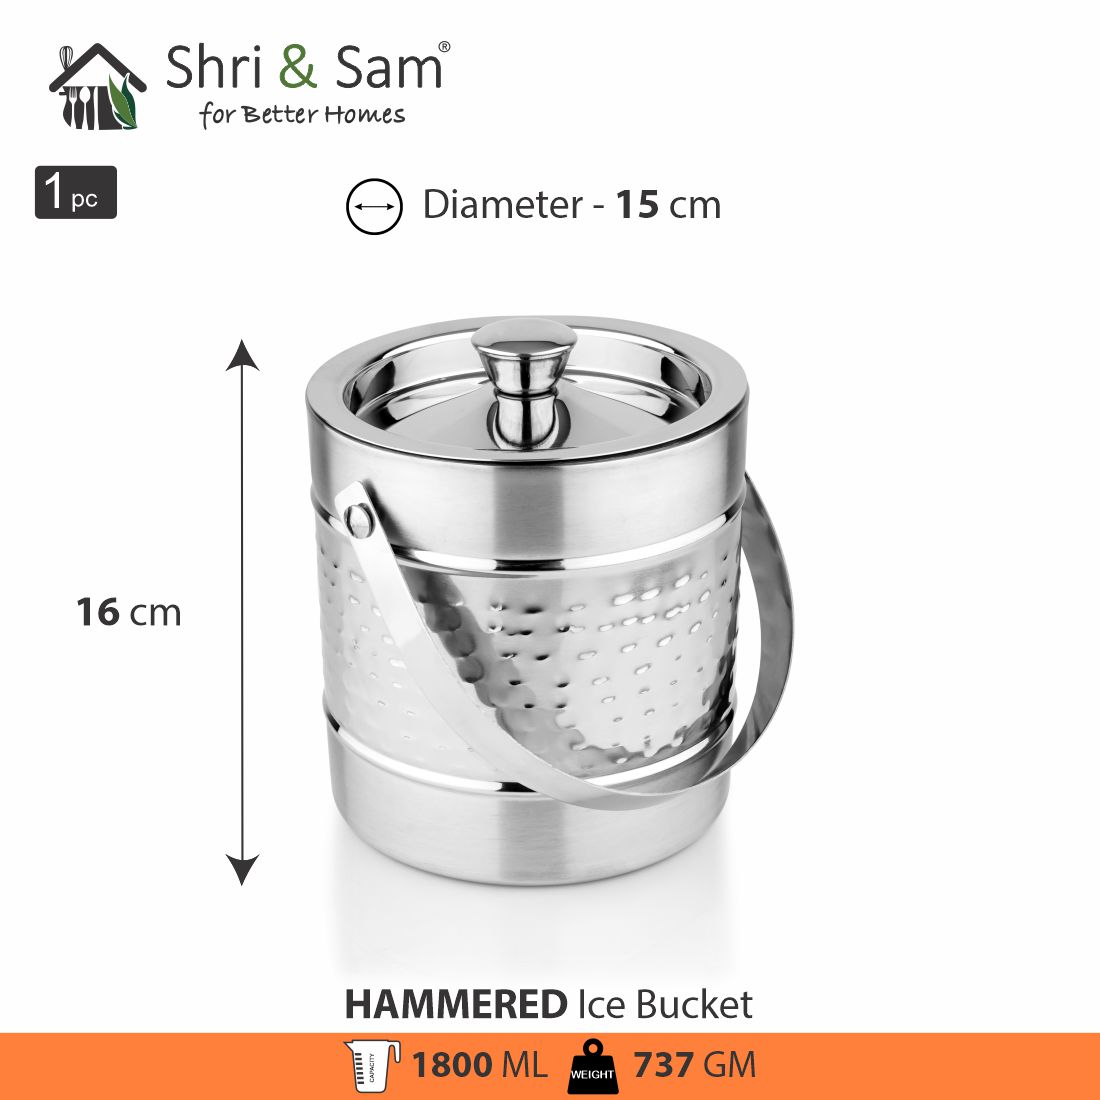 Stainless Steel Ice Bucket Hammered